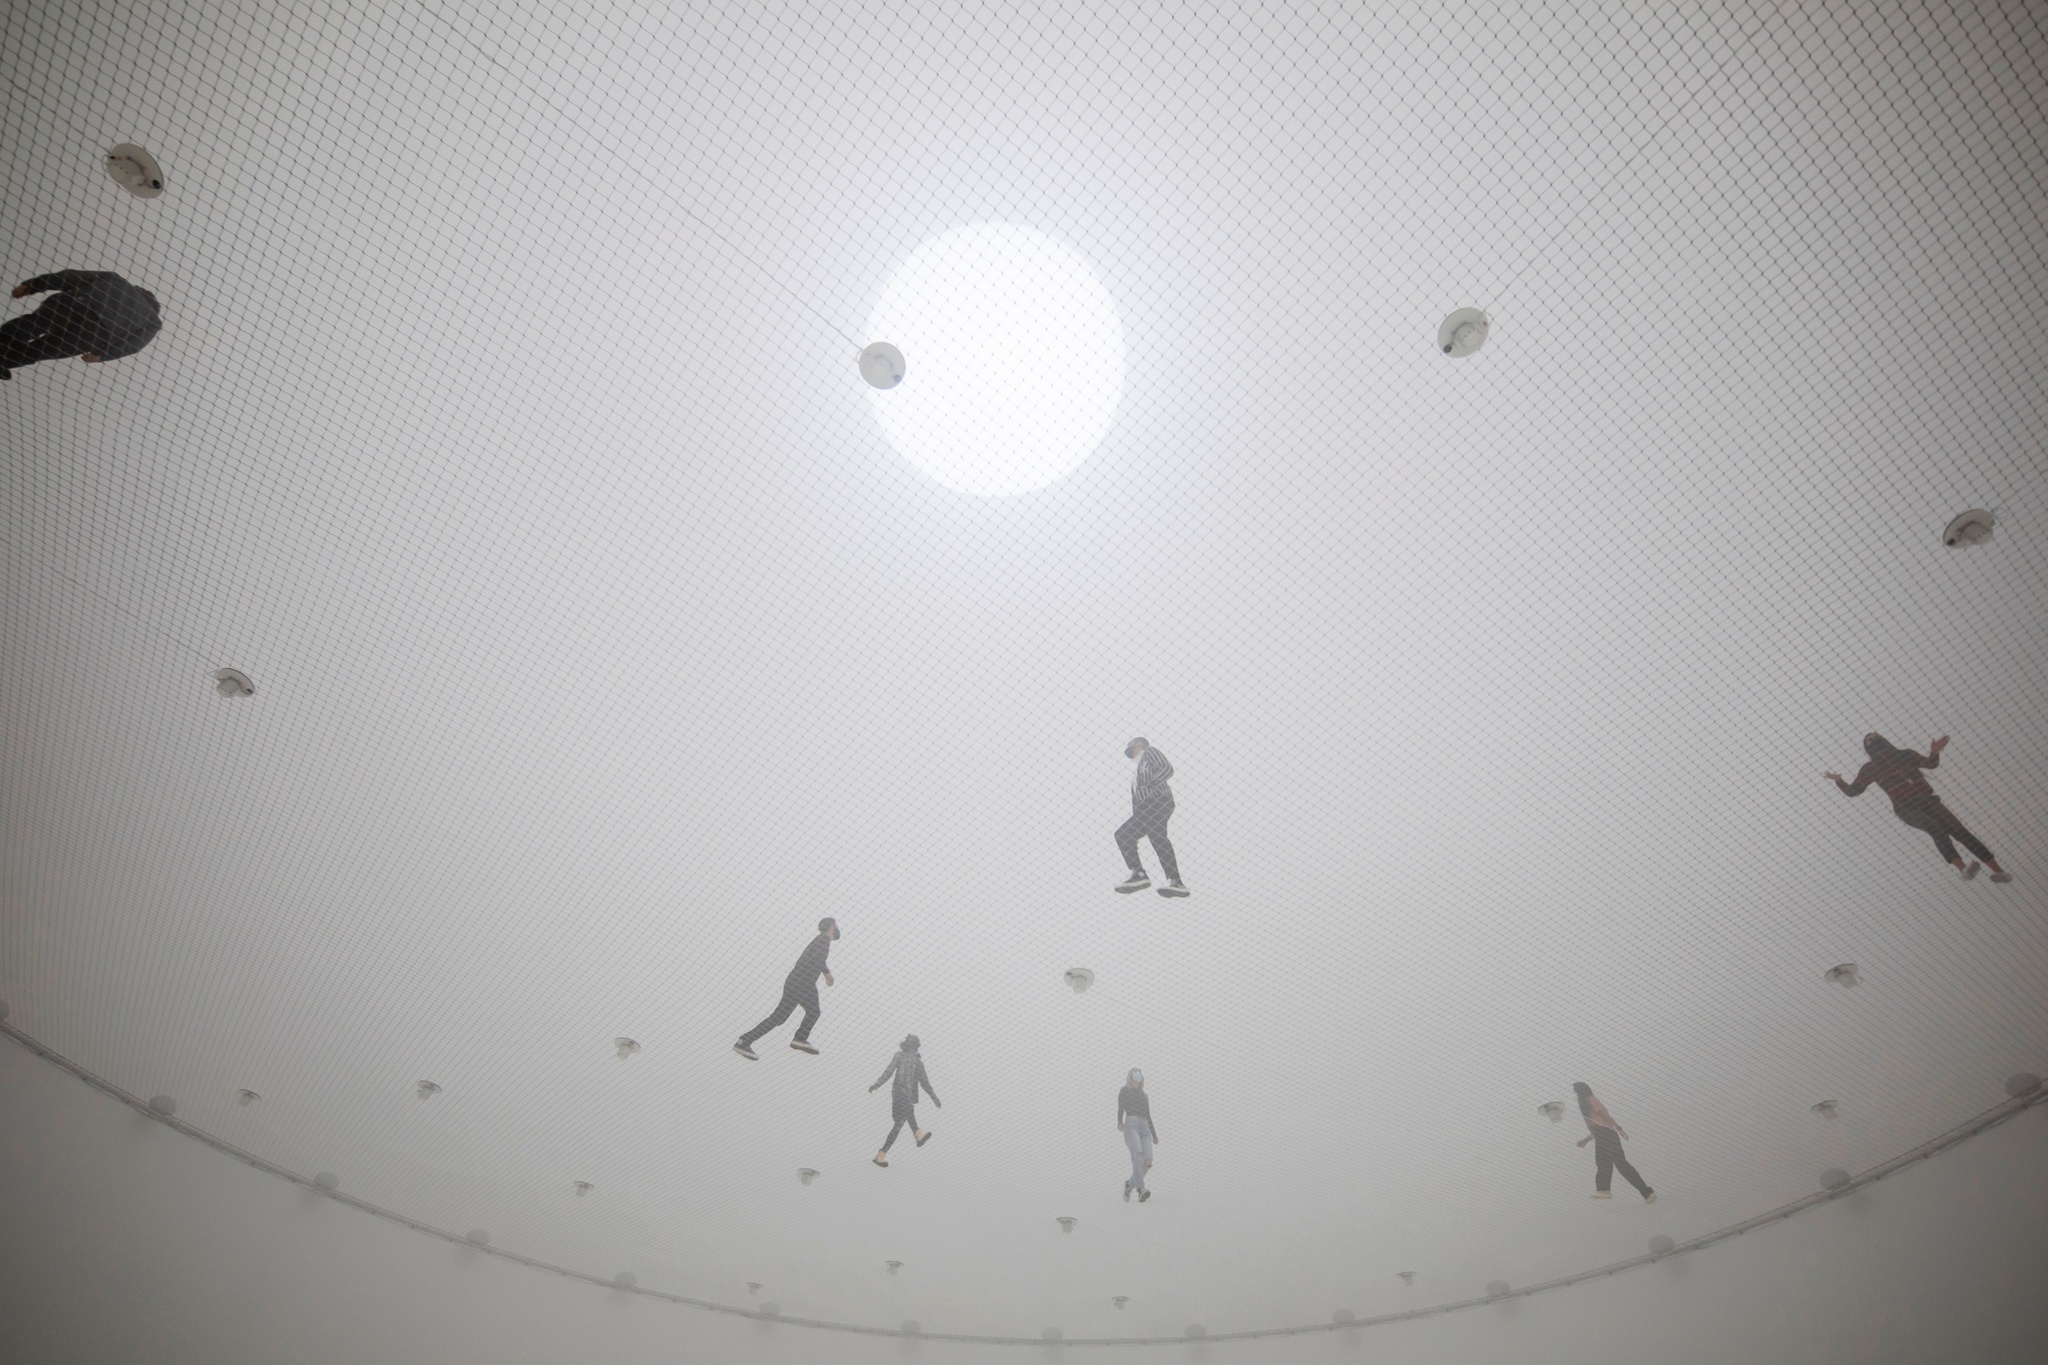 People walking on a net suspended 40 feet in the air. They are seen from below and are spaced out across the net, within a large white spherical space.